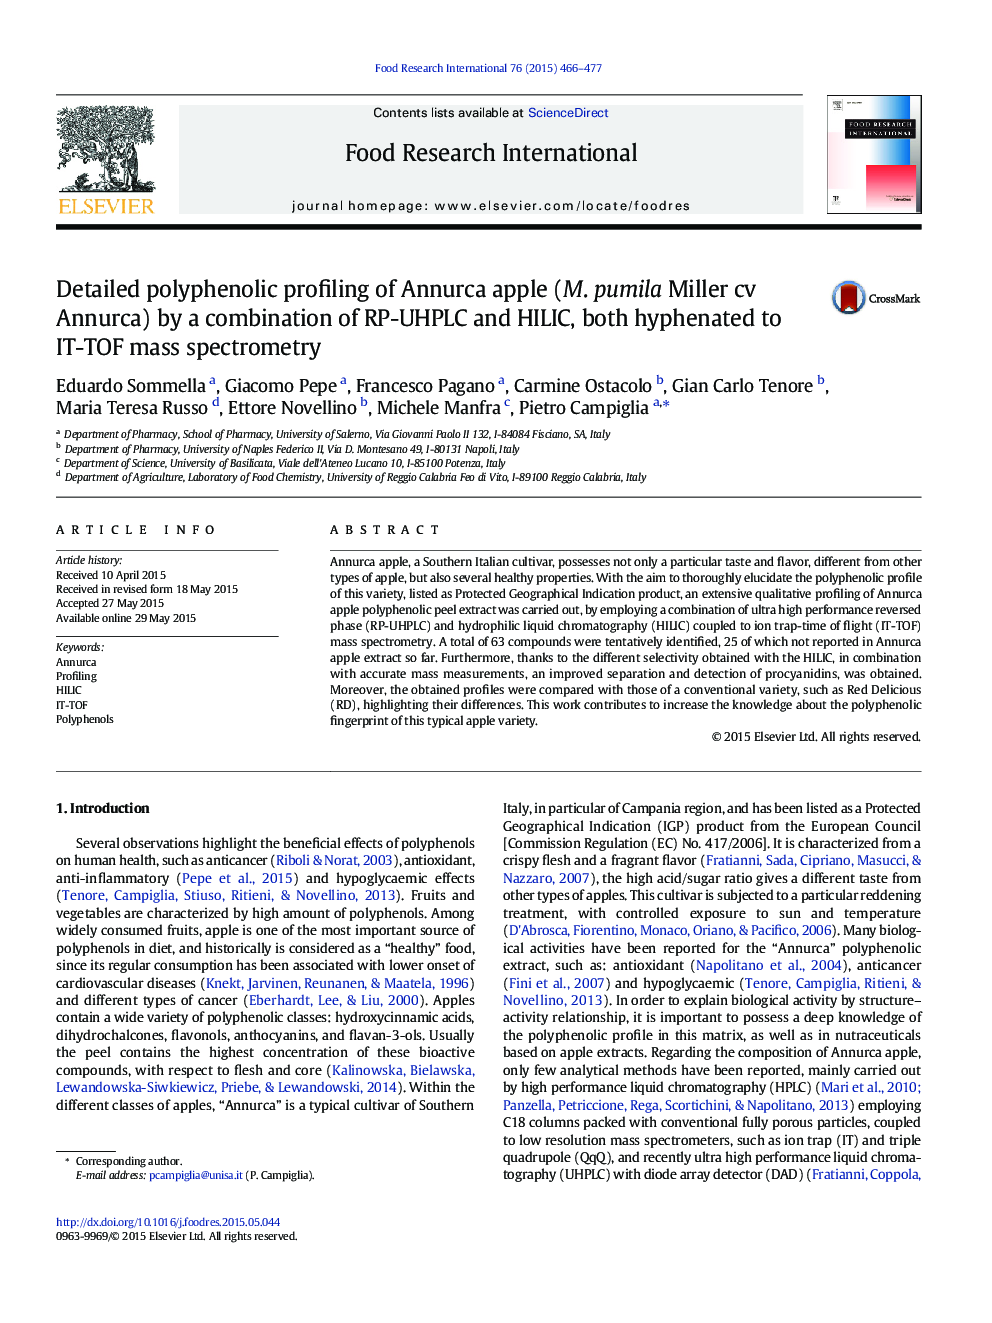 Detailed polyphenolic profiling of Annurca apple (M. pumila Miller cv Annurca) by a combination of RP-UHPLC and HILIC, both hyphenated to IT-TOF mass spectrometry